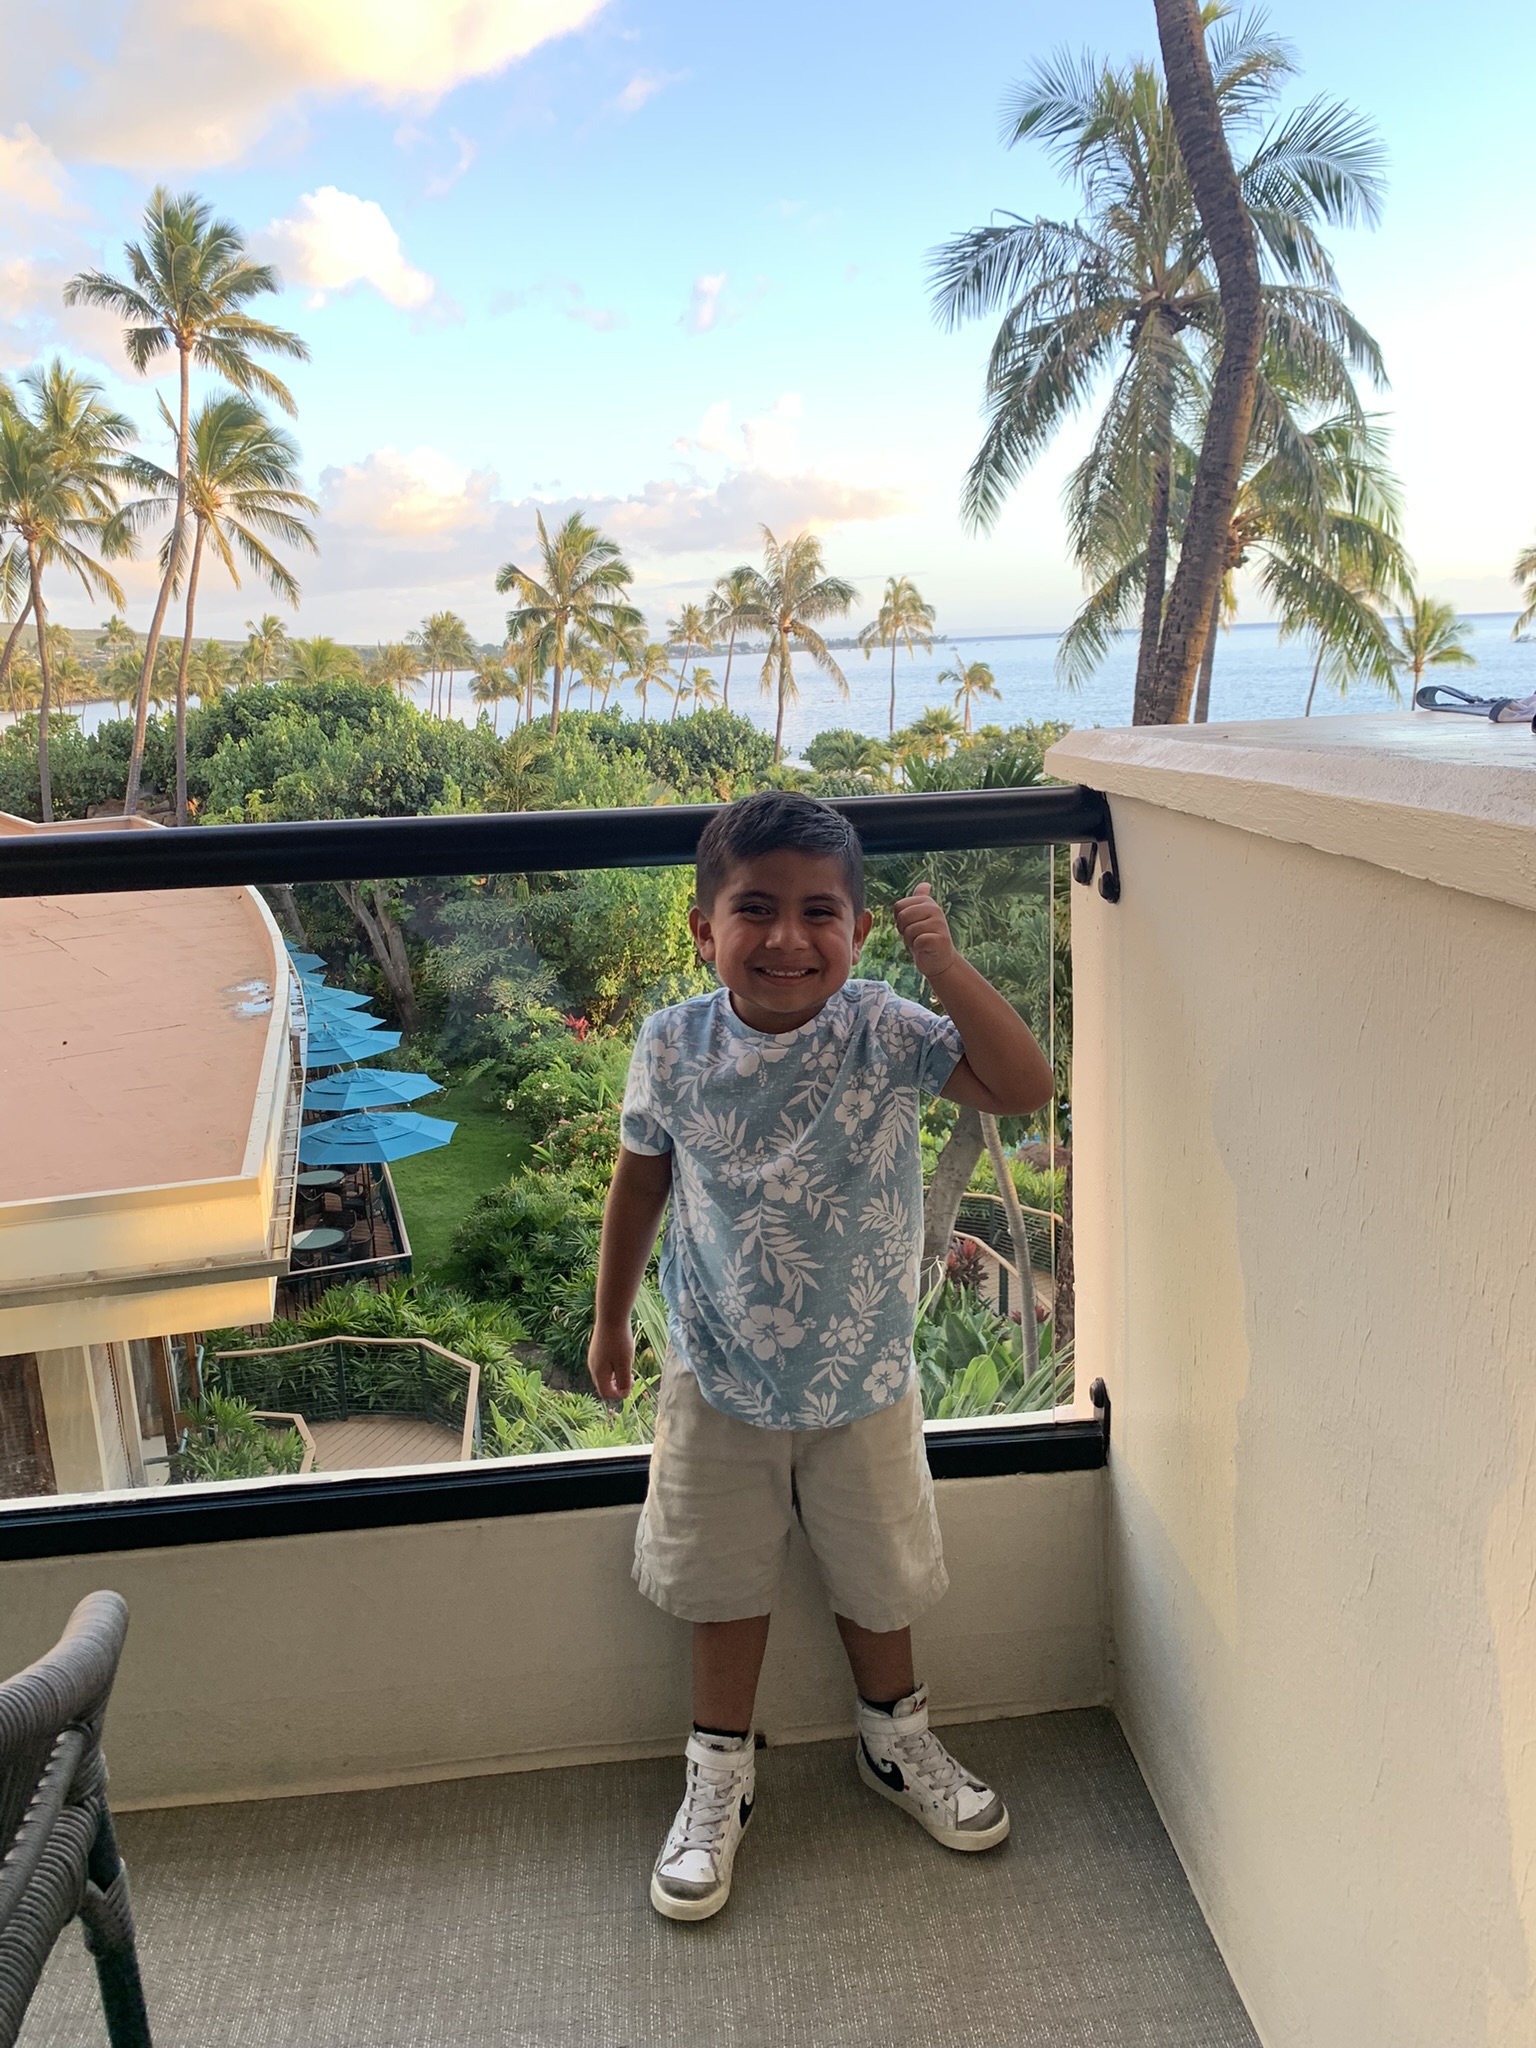 Small boy on hotel balcony with palm trees